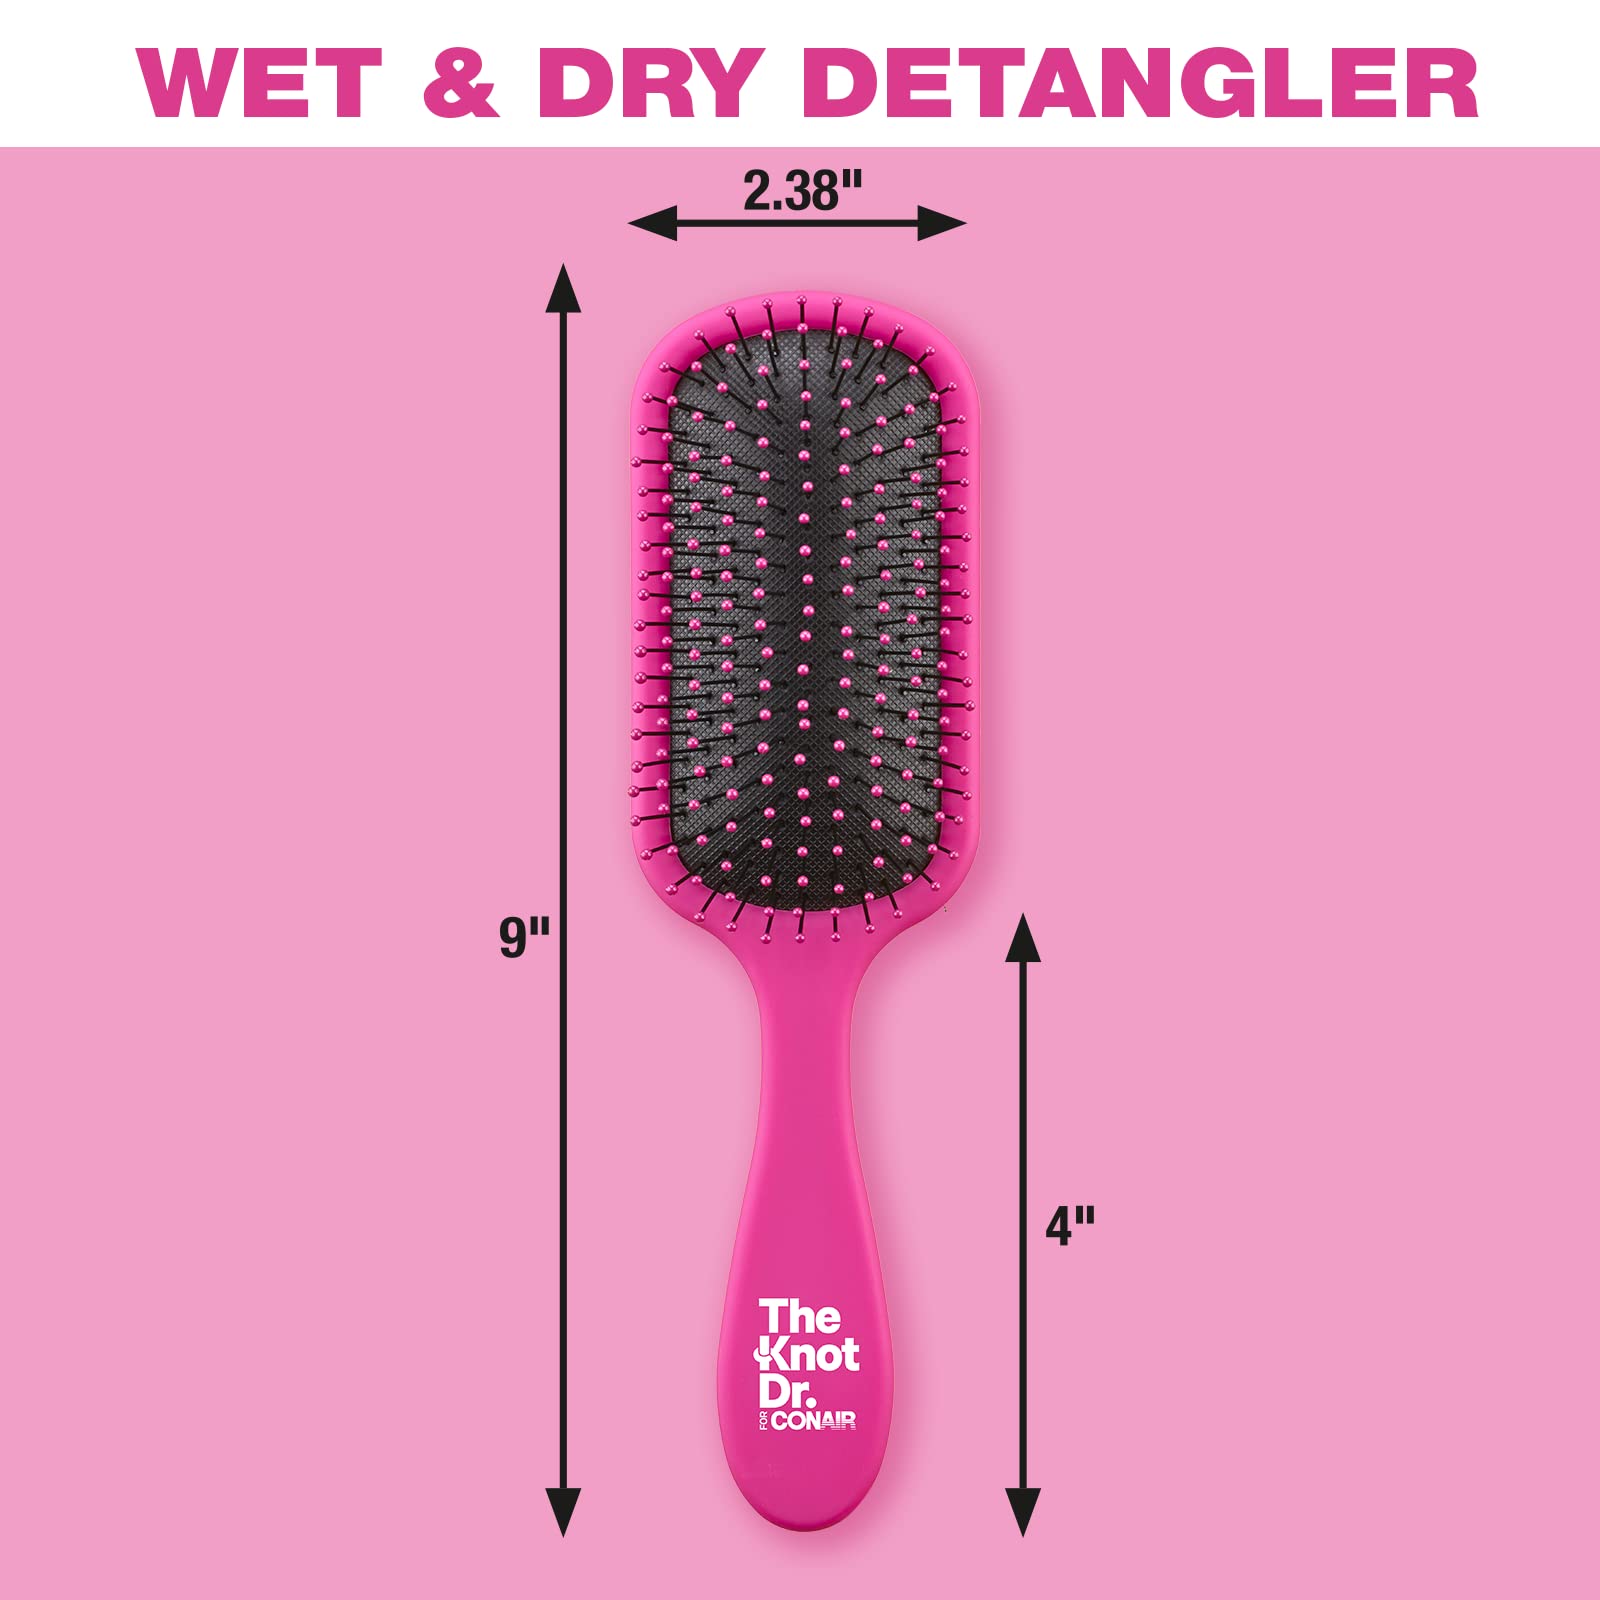 The Knot Dr. for Conair Hair Brush, Wet and Dry Detangler, Removes Knots and Tangles, For All Hair Types, Pink (Pack of 2)